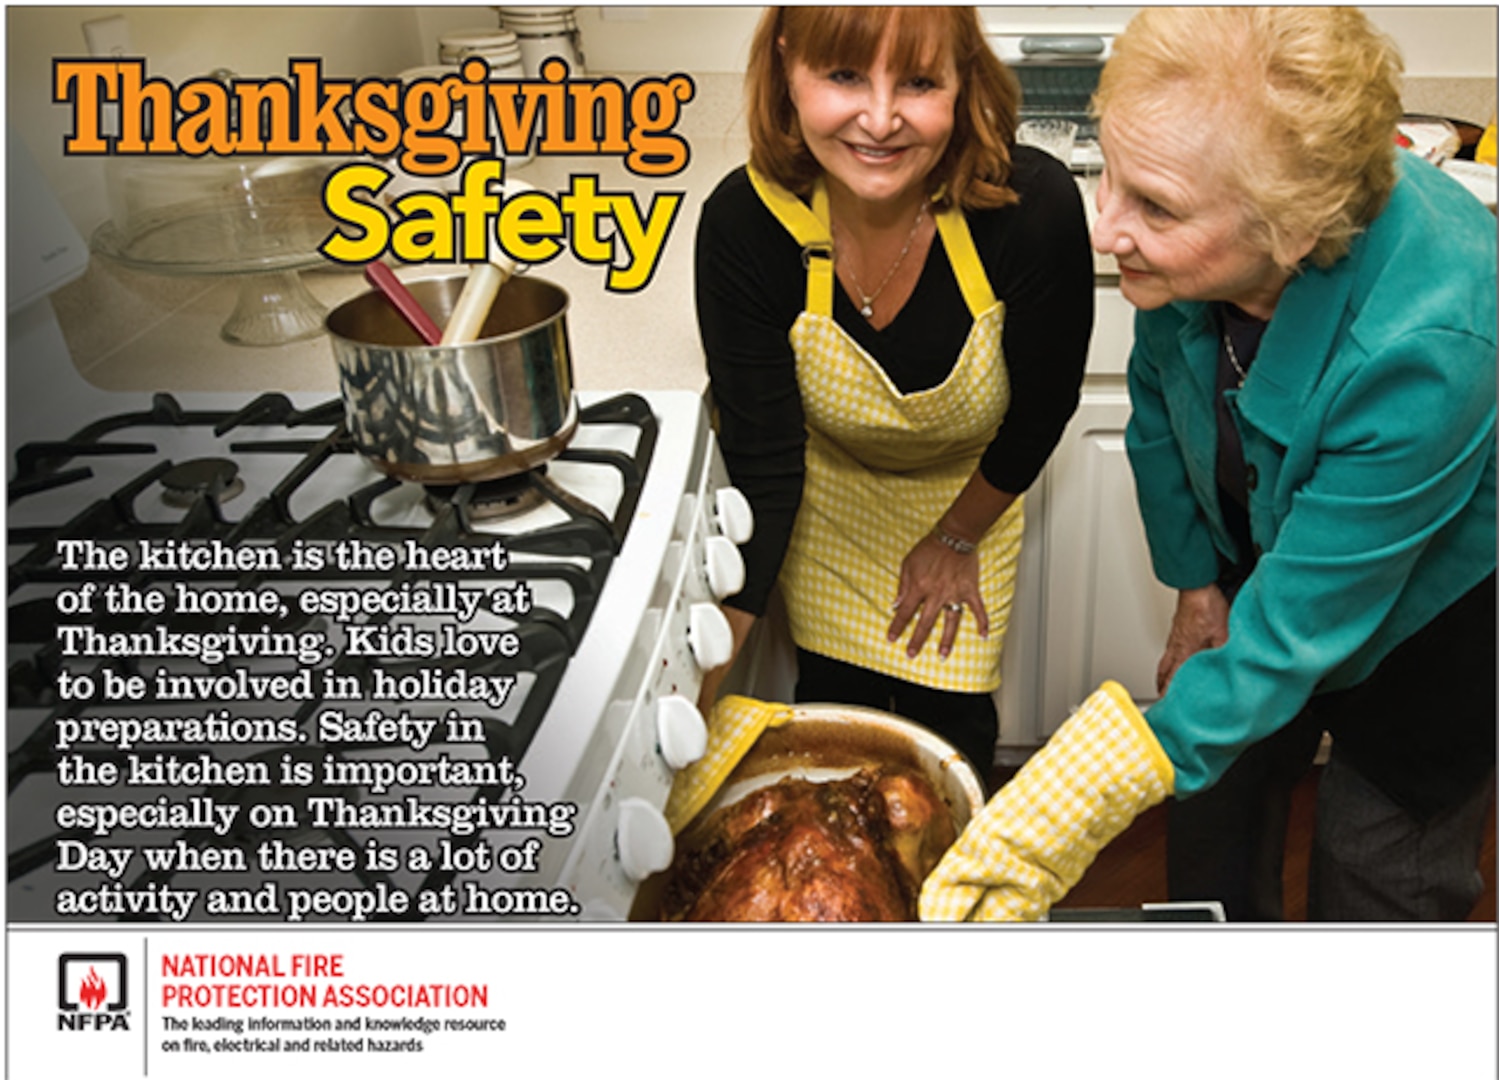 Tips to help employees practice safety during the holiday season